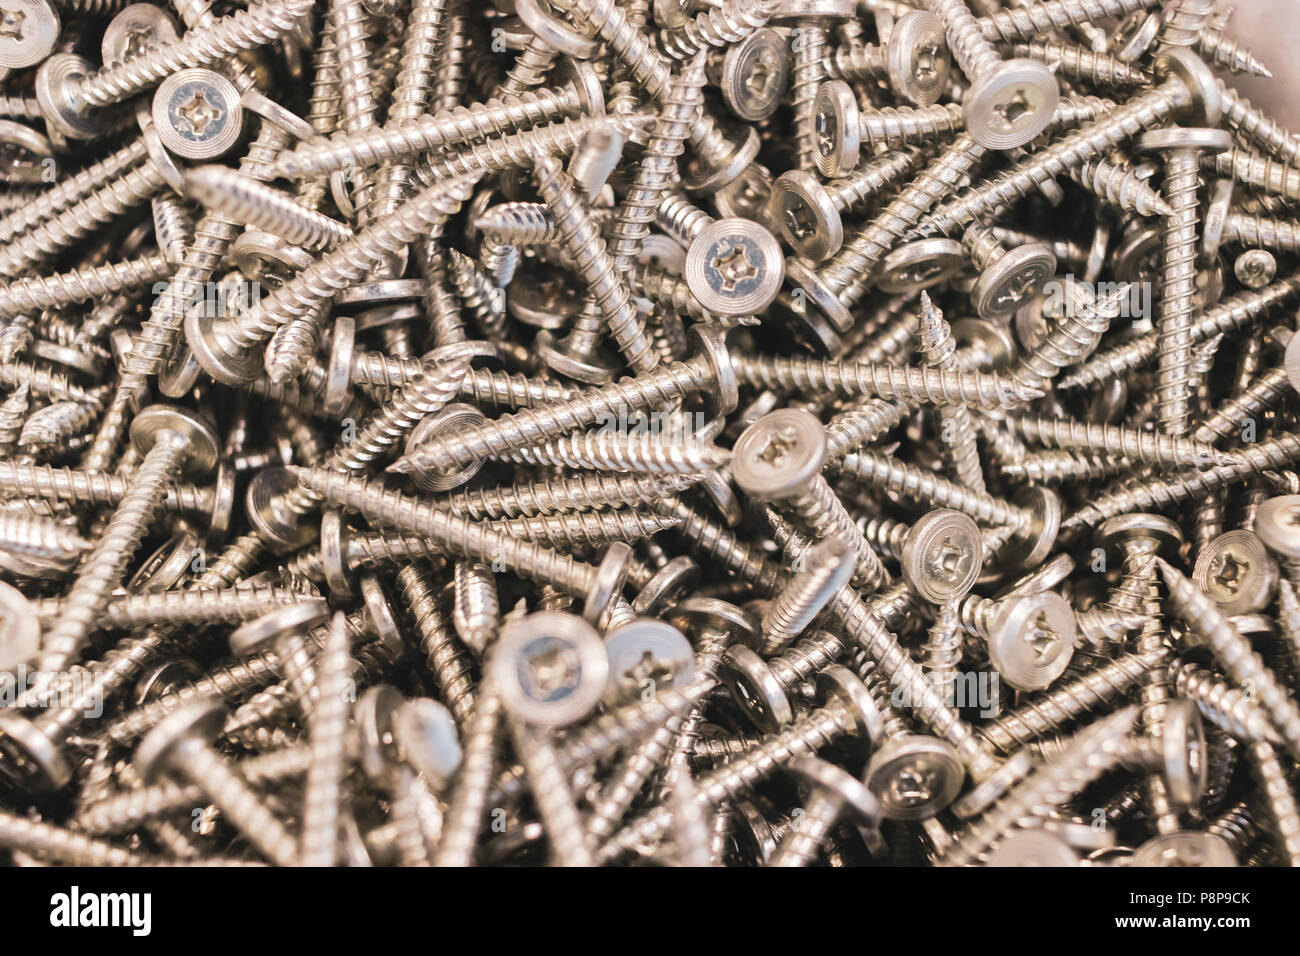 Collection of Screws in bucket Stock Photo - Alamy